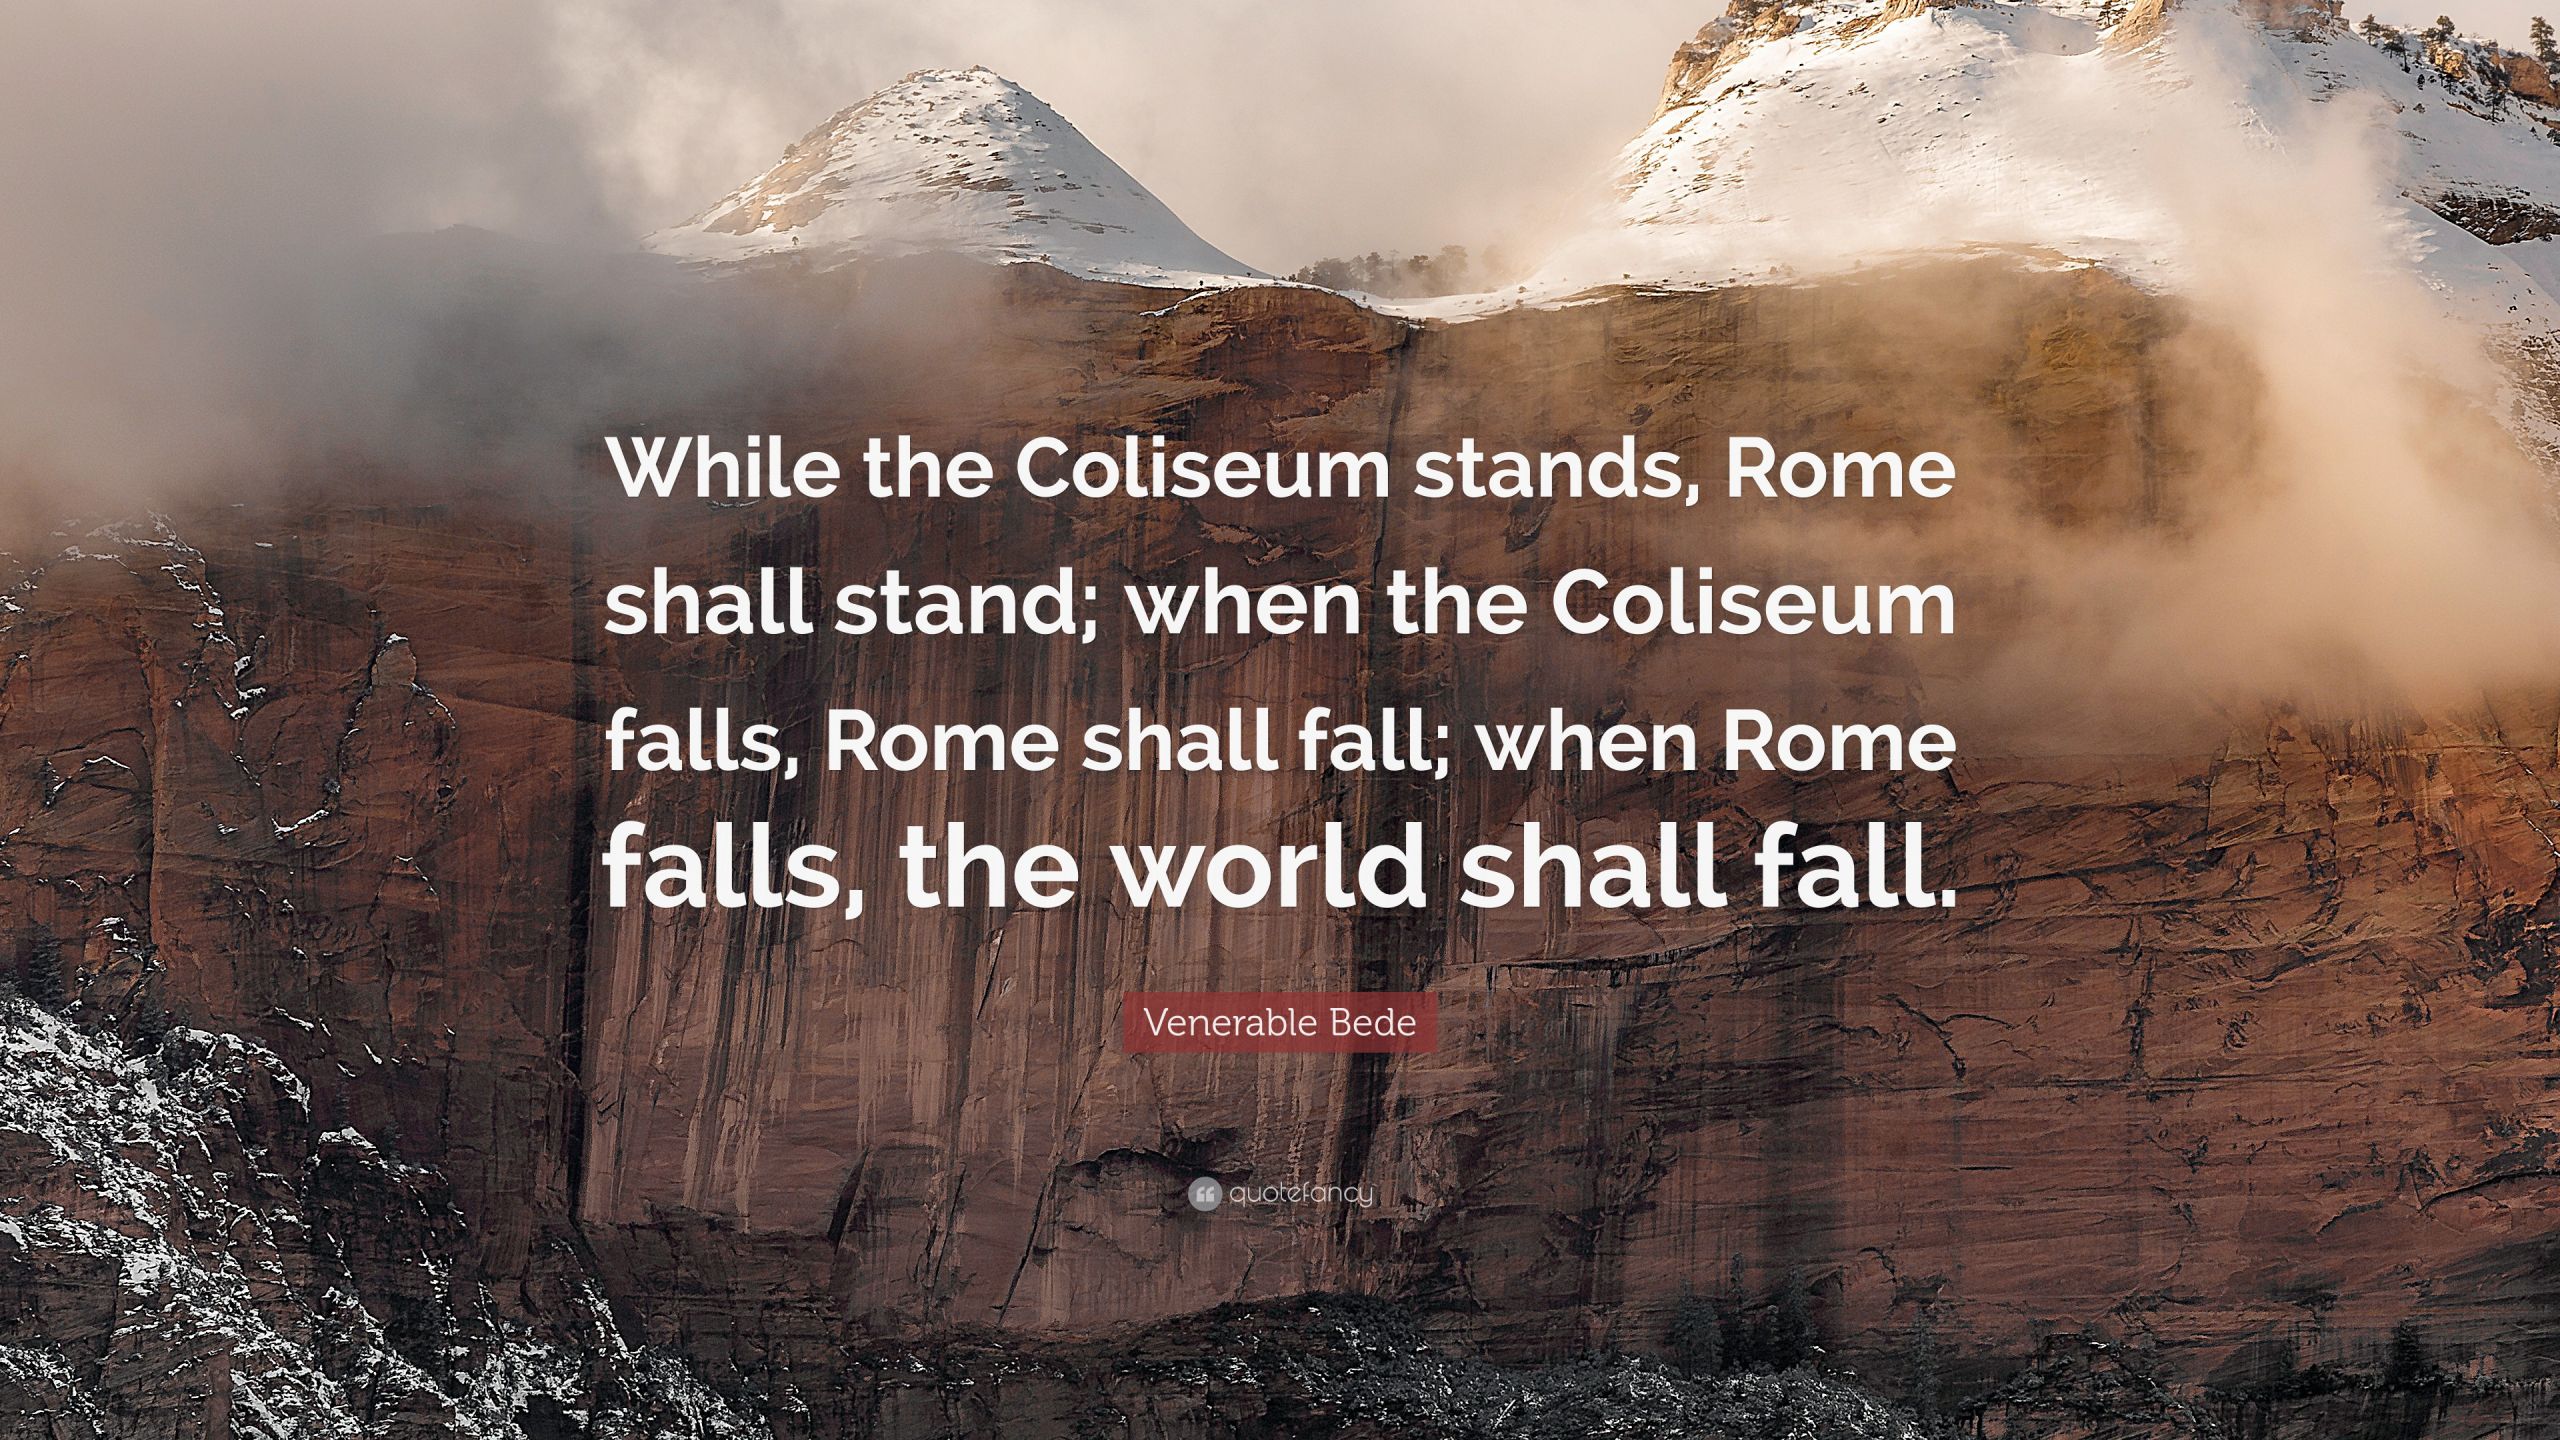 Quotes About The Fall Of Rome
 Venerable Bede Quote “While the Coliseum stands Rome